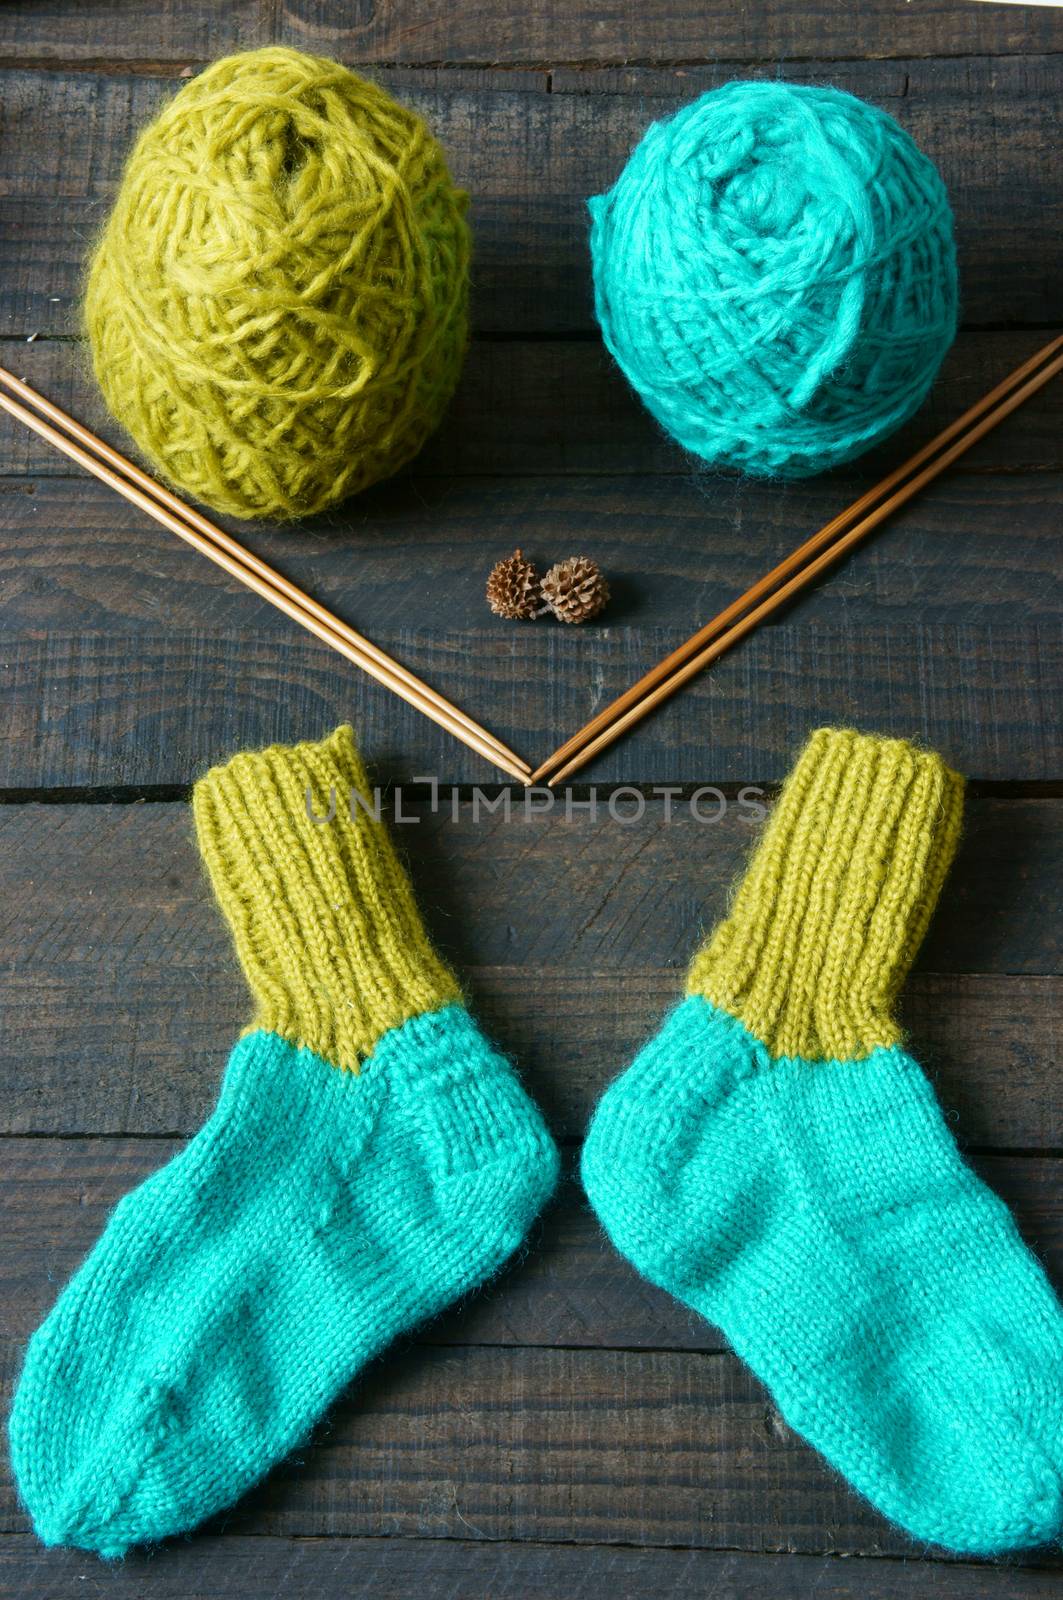 Pair of socks for winter season, knit from vibrant woollen for kid, keep foot in warm on cold day, handmade stockings, woman hand knitting with love